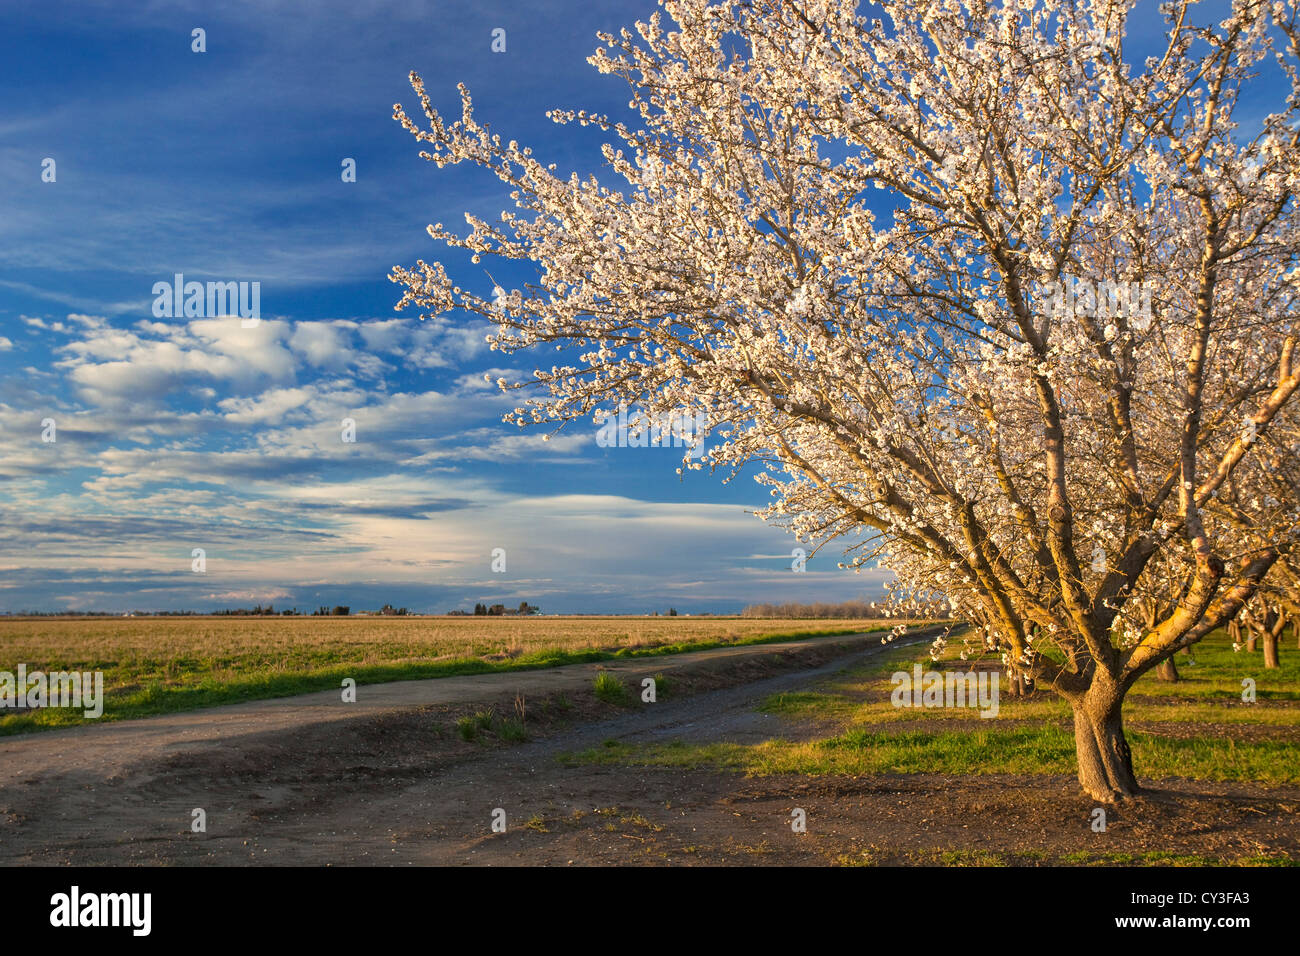 Almonds trees in the Sacramento Valley of northern California in bloom. Stock Photo